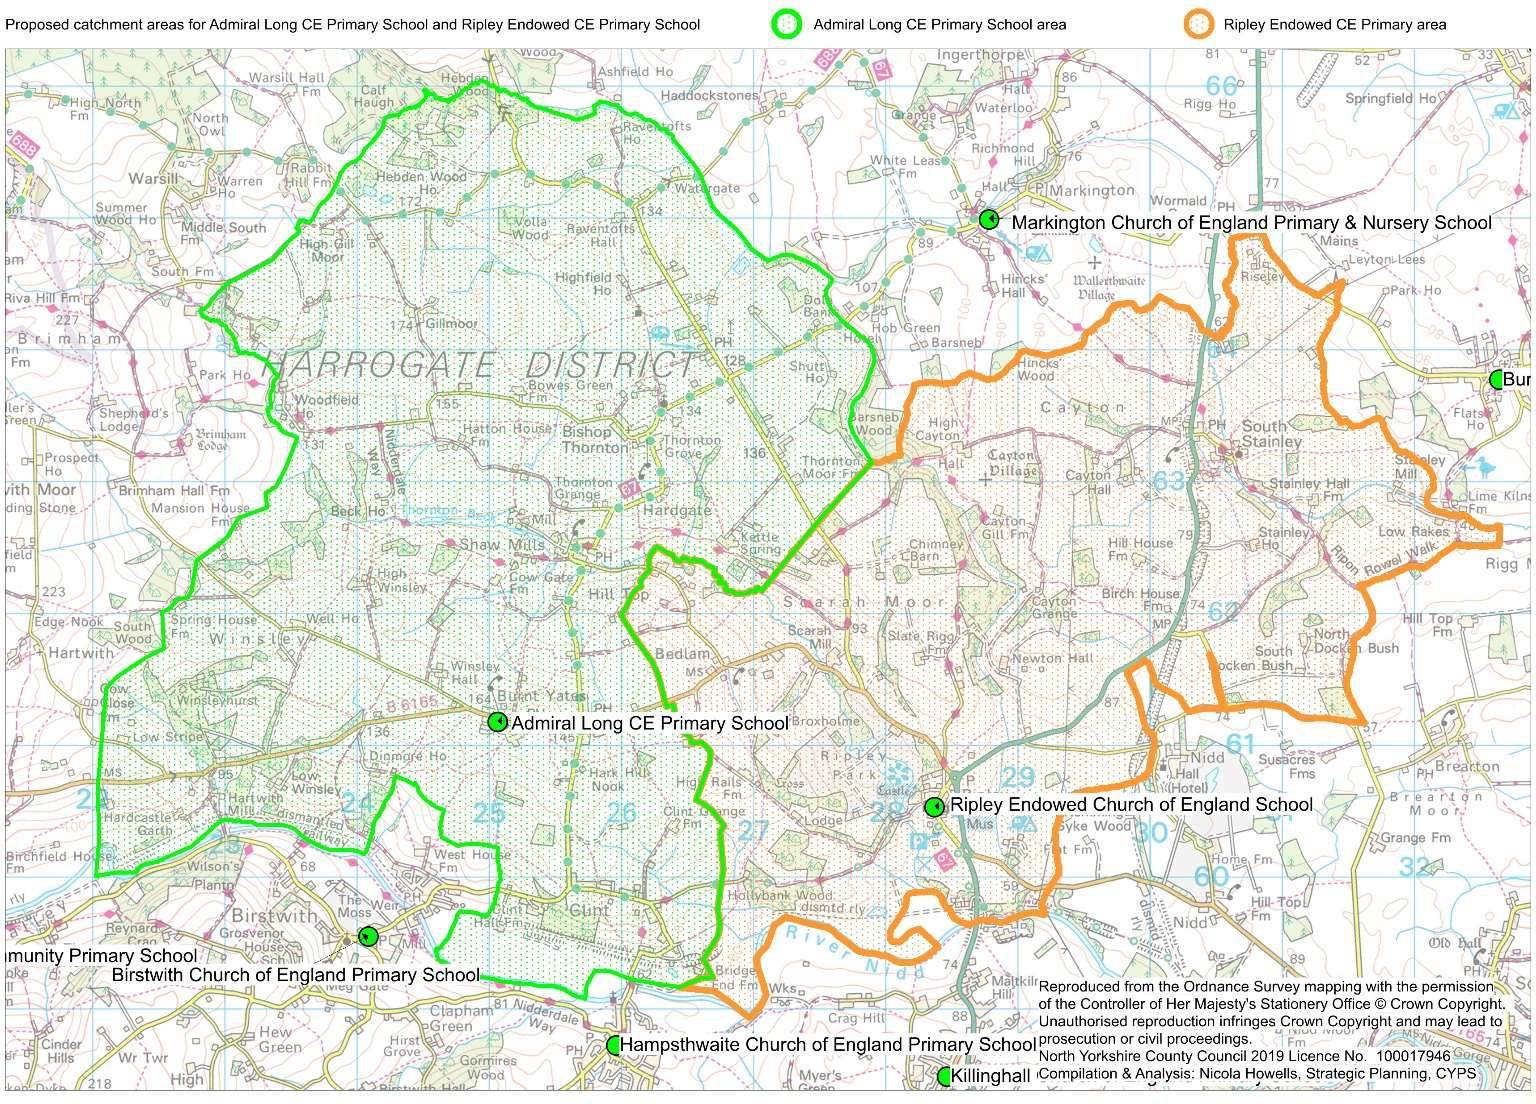 Proposed catchment areas for Admiral Long CE Primary School and Ripley Endowed Church of England Primary School. Contact us for this in another format.